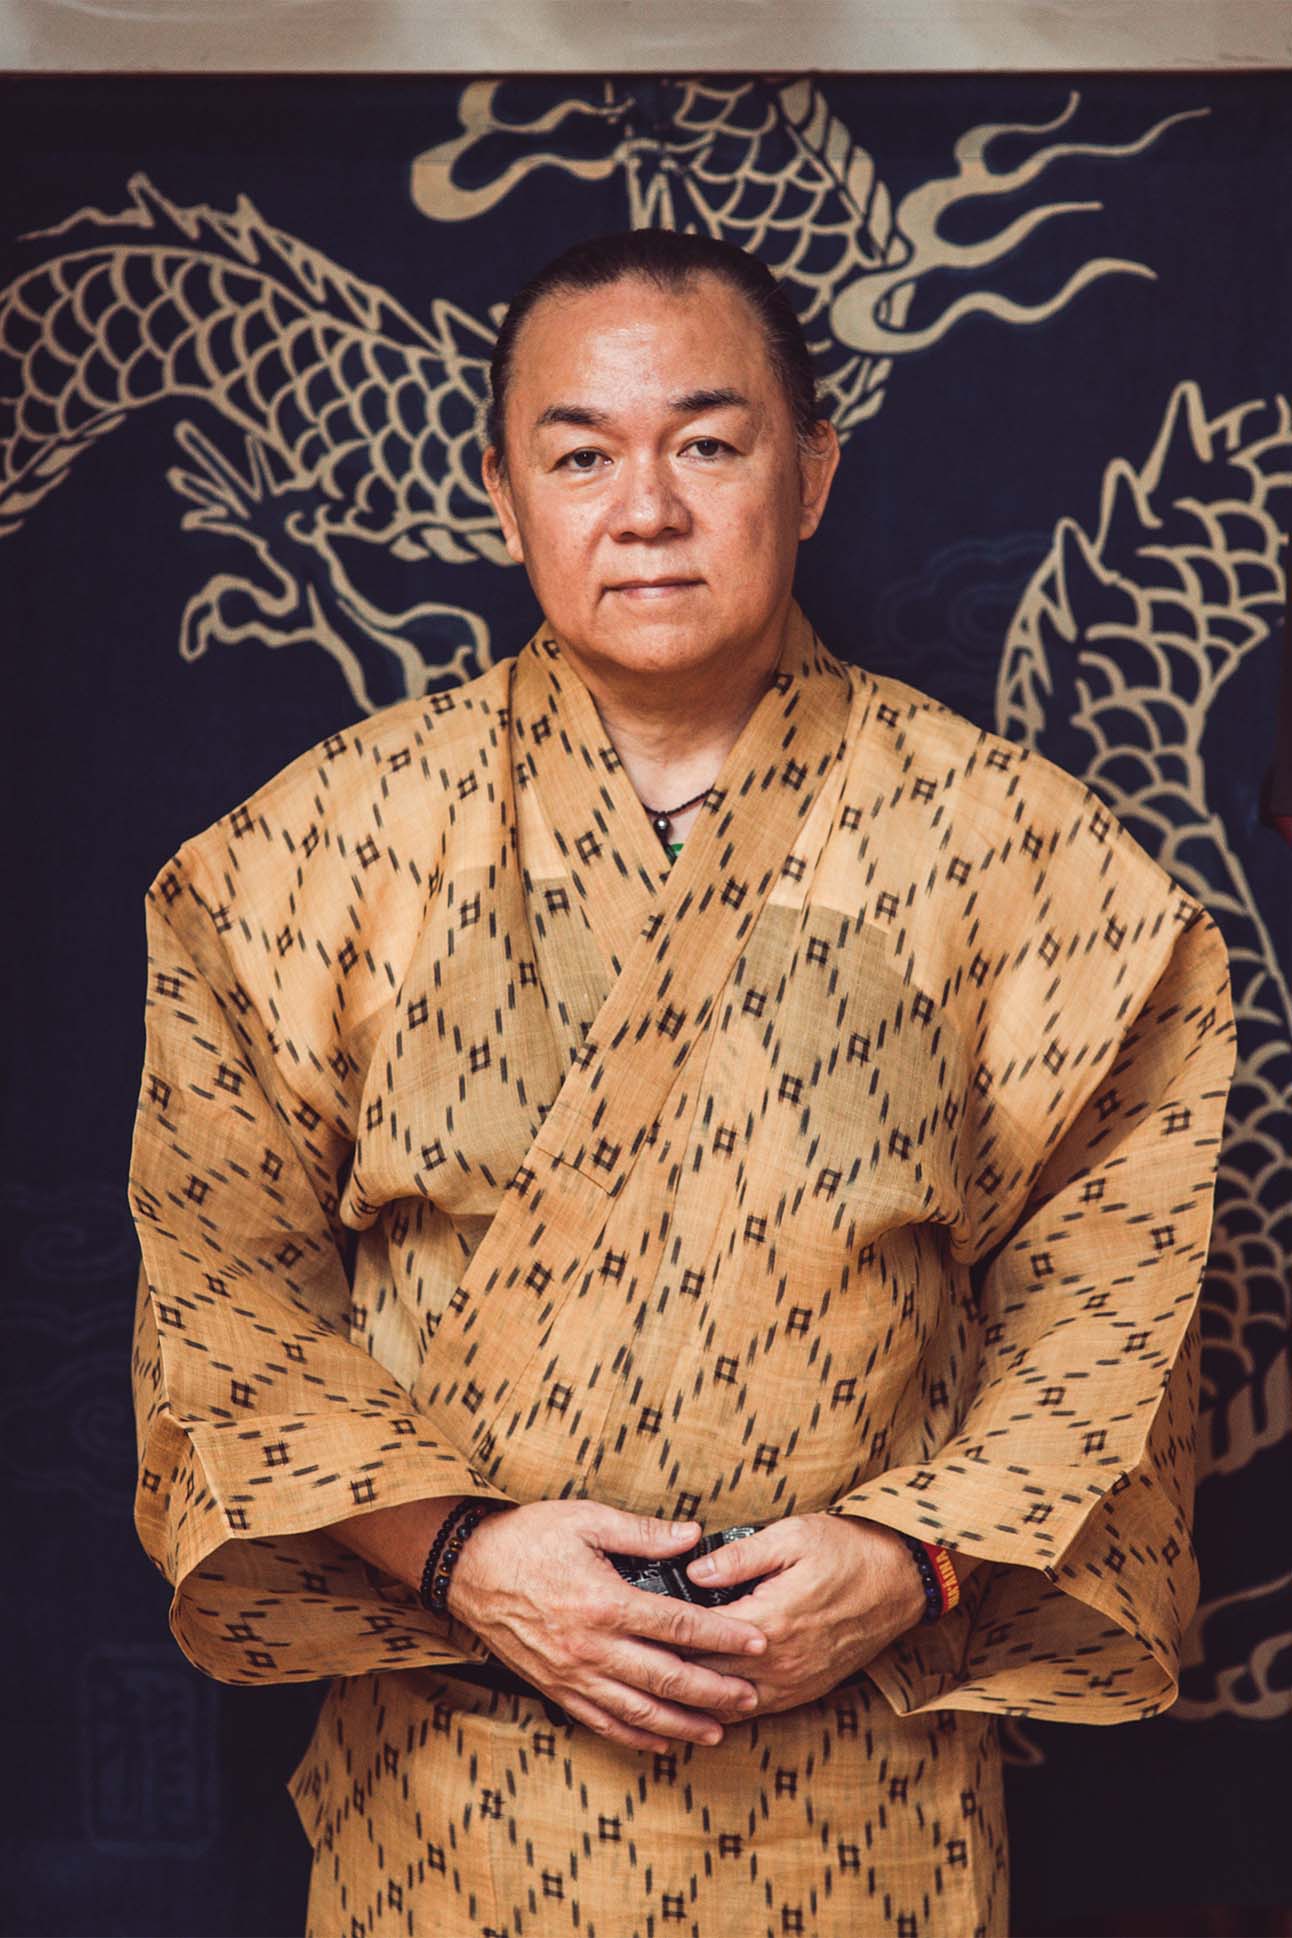 A person wearing a traditional patterned kimono with folded arms in front of a dark backdrop featuring a large white dragon design.